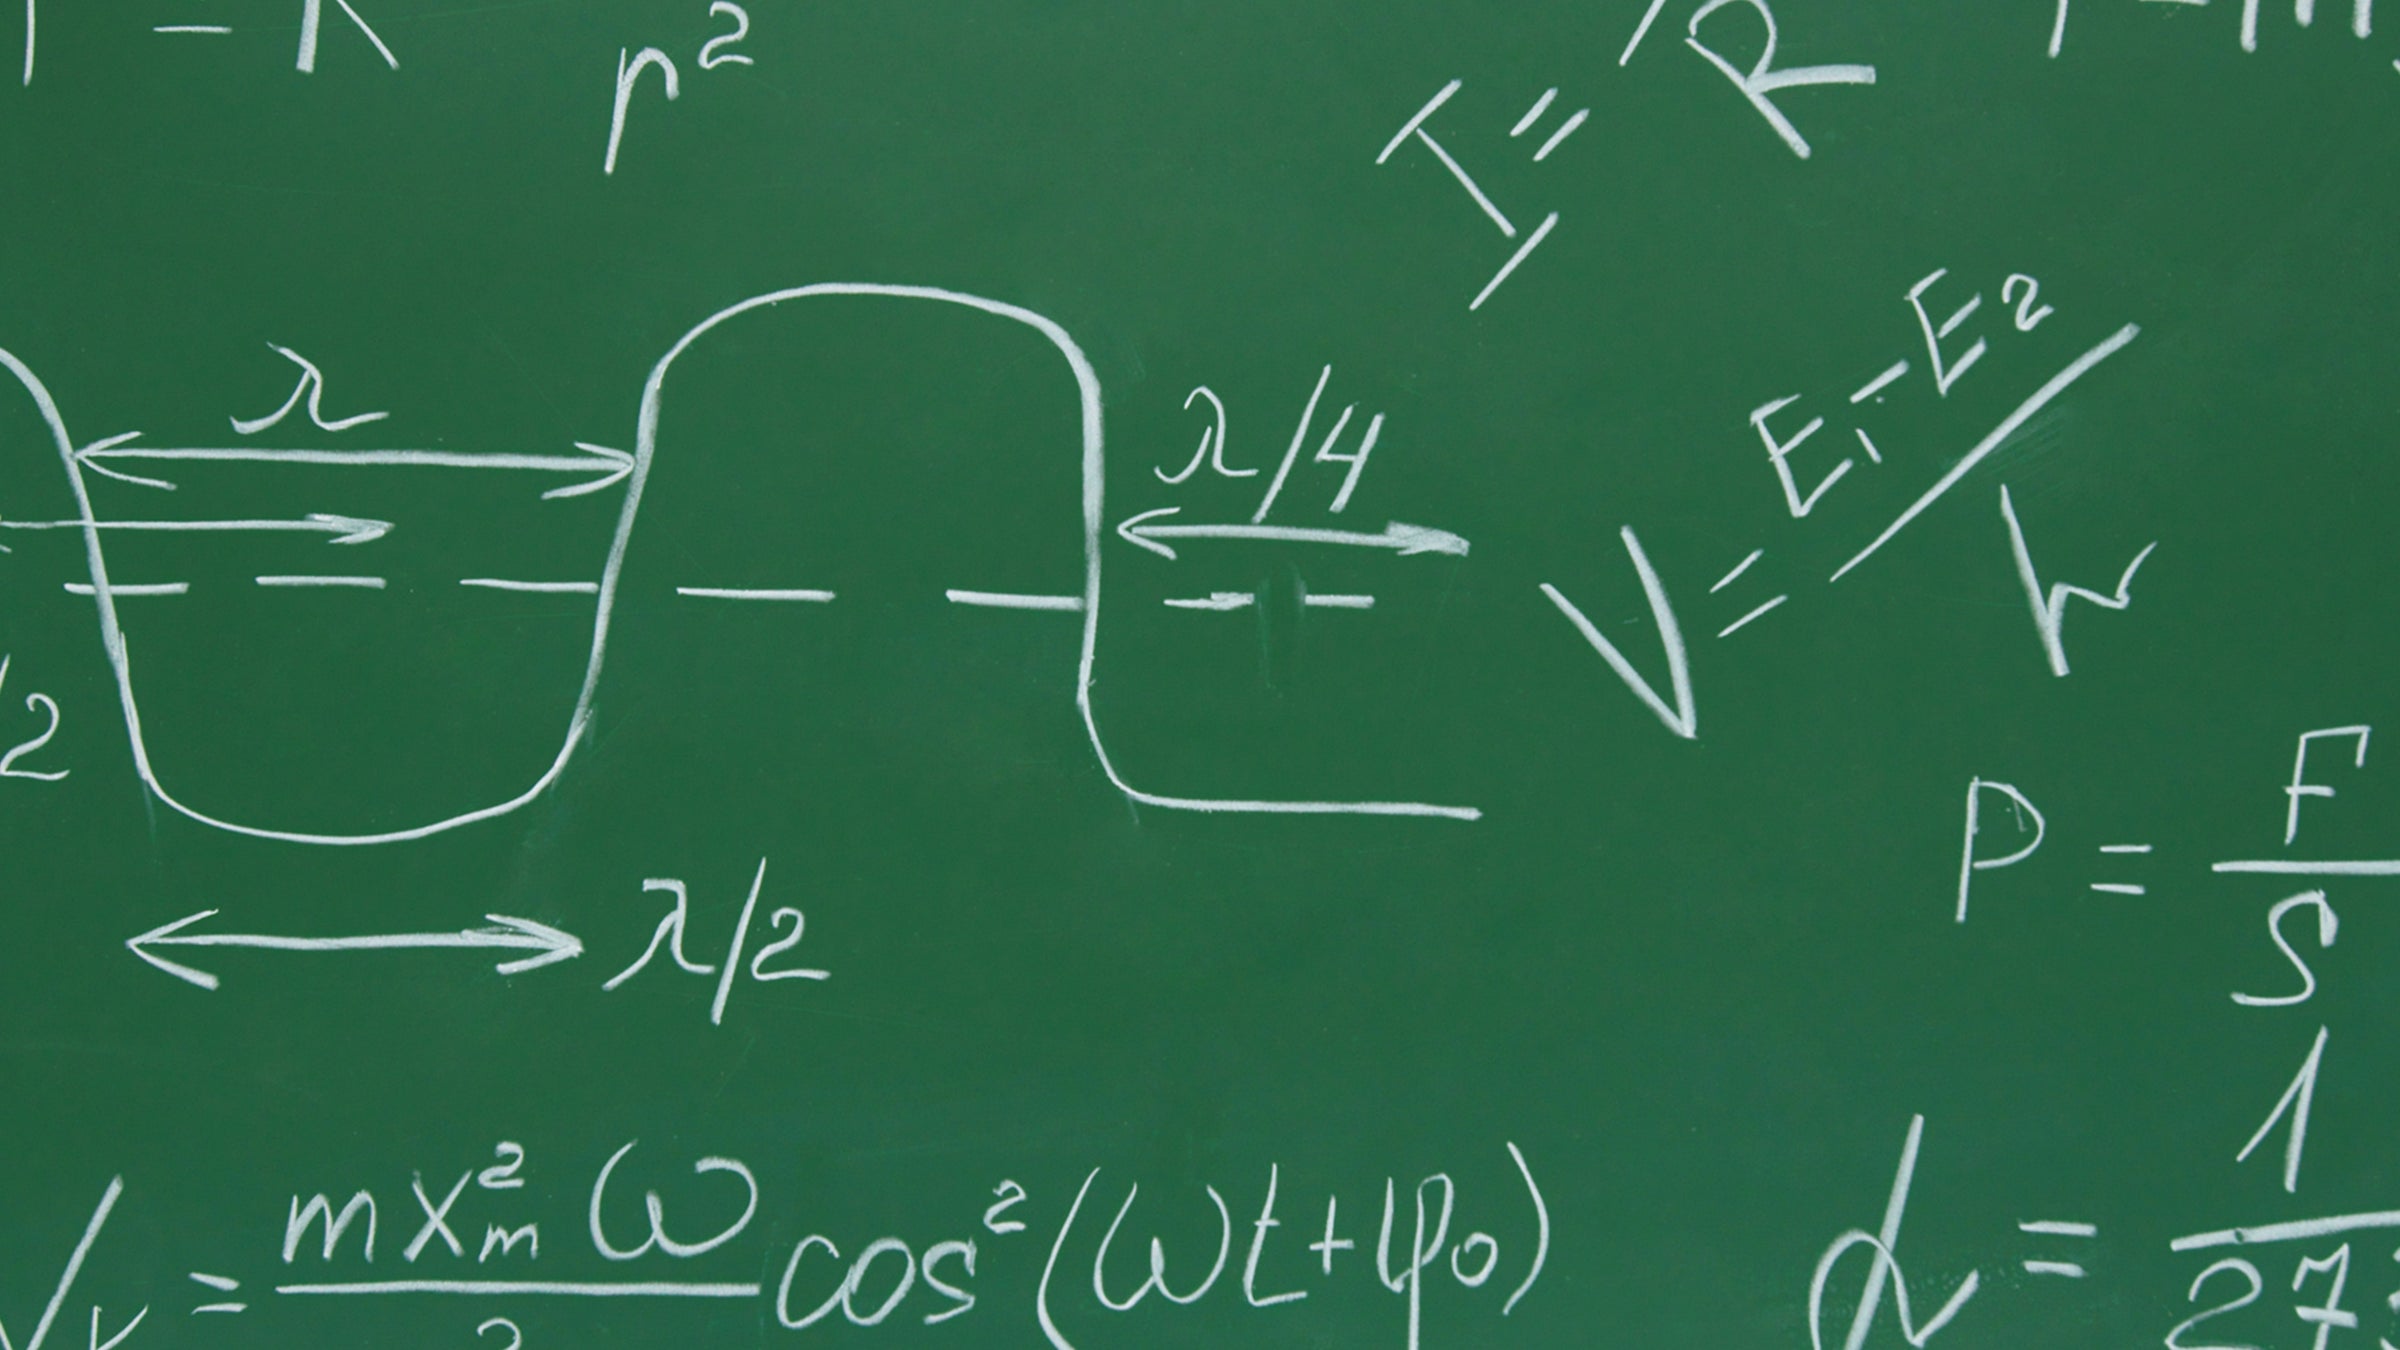 green chalkboard showing equations representing physics